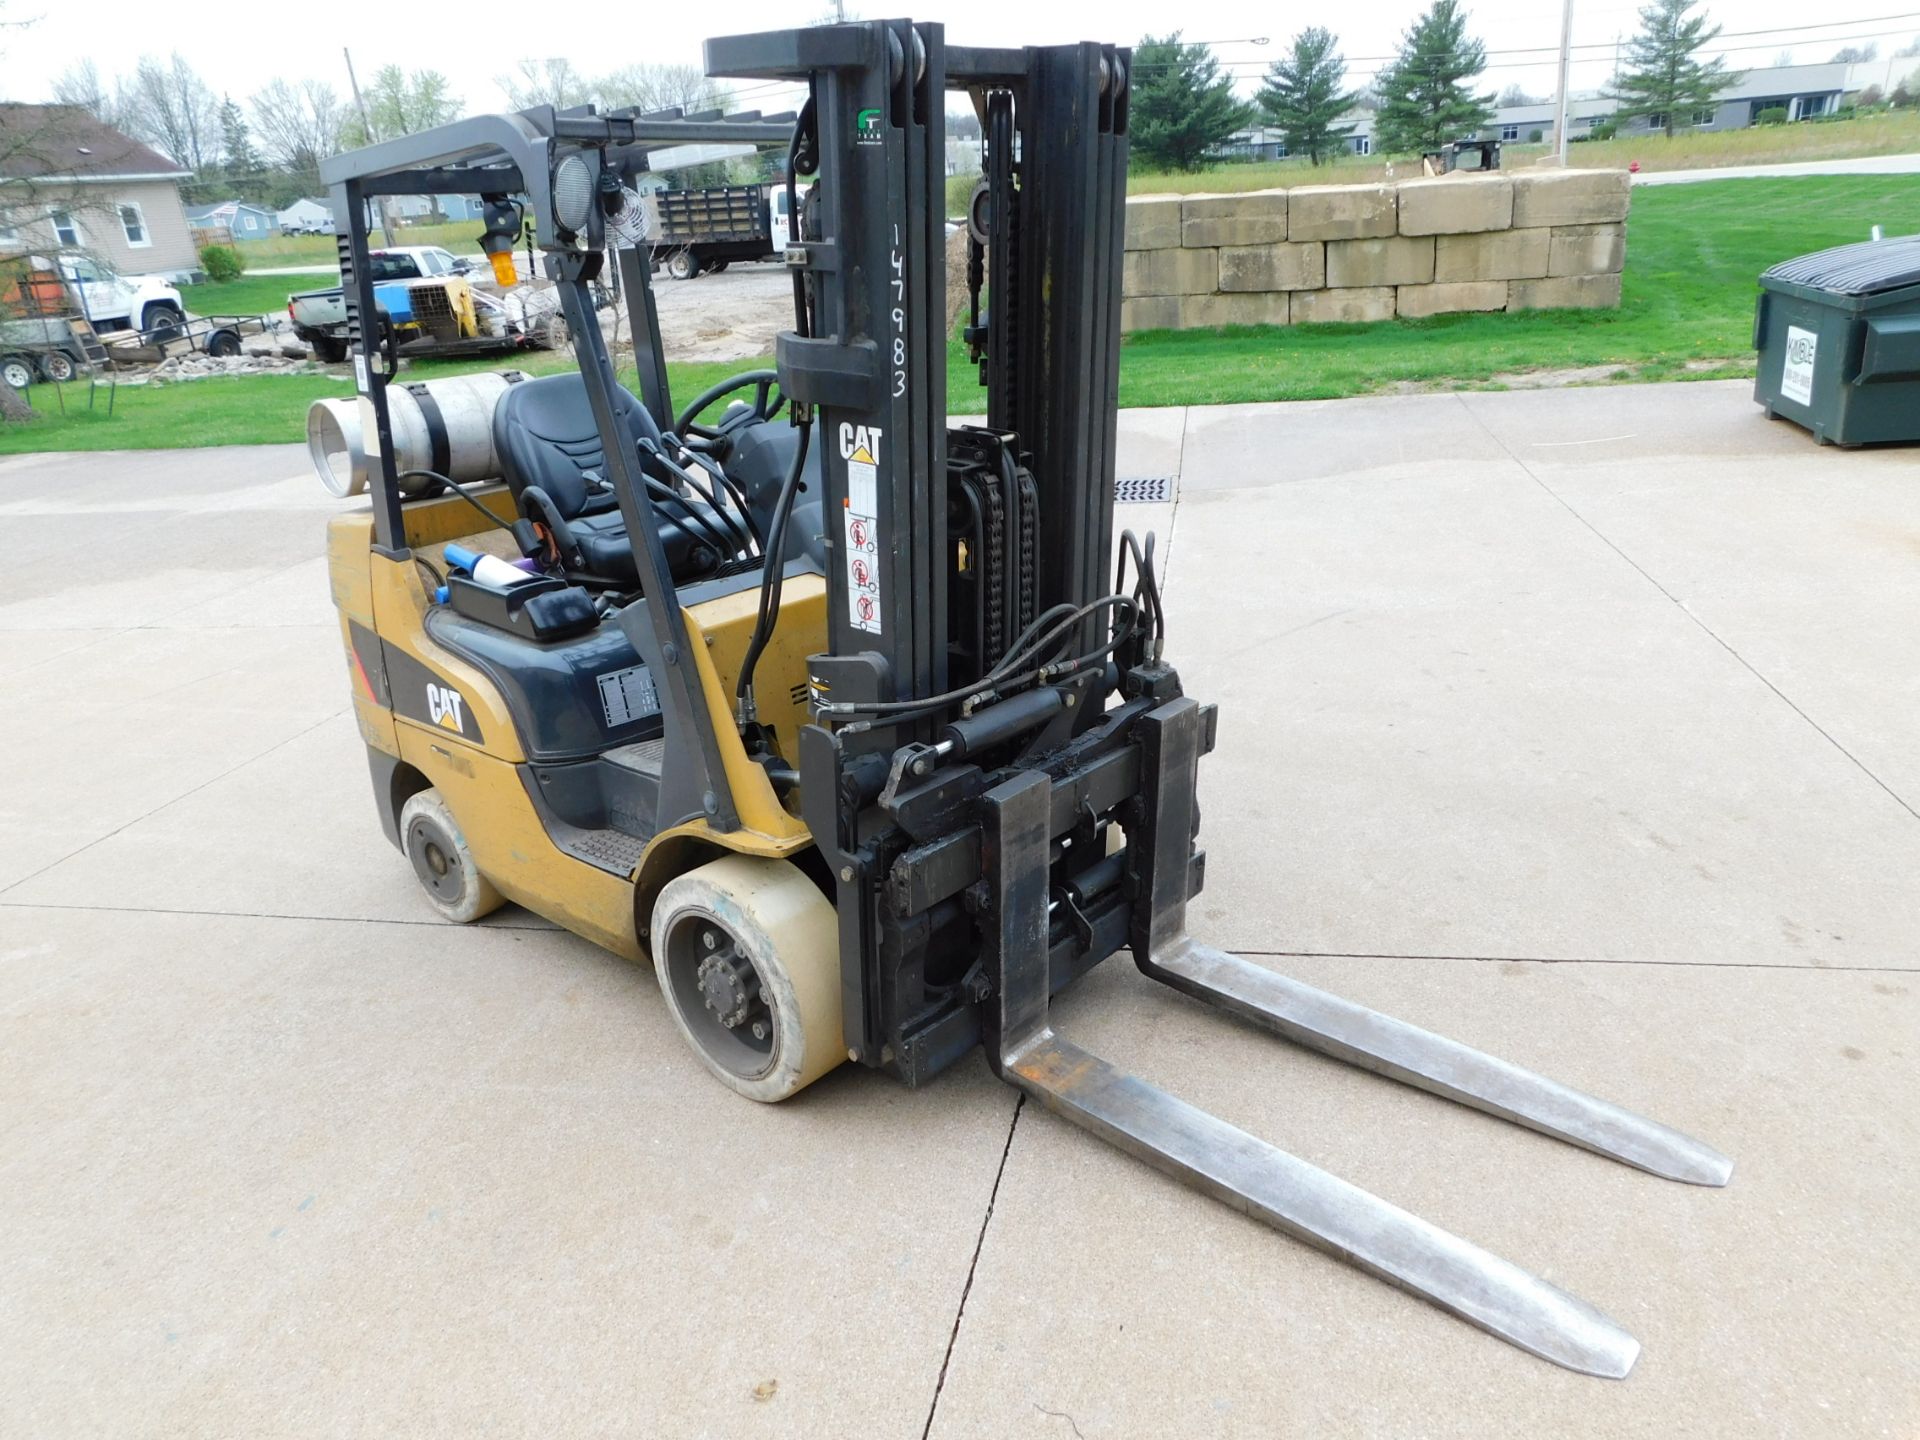 Caterpillar Model 2C6000 Forklift, SN AT83F40876, 4,500 lb cap., LP, Non-Marking Hard Tires, 3-Stage - Image 4 of 21